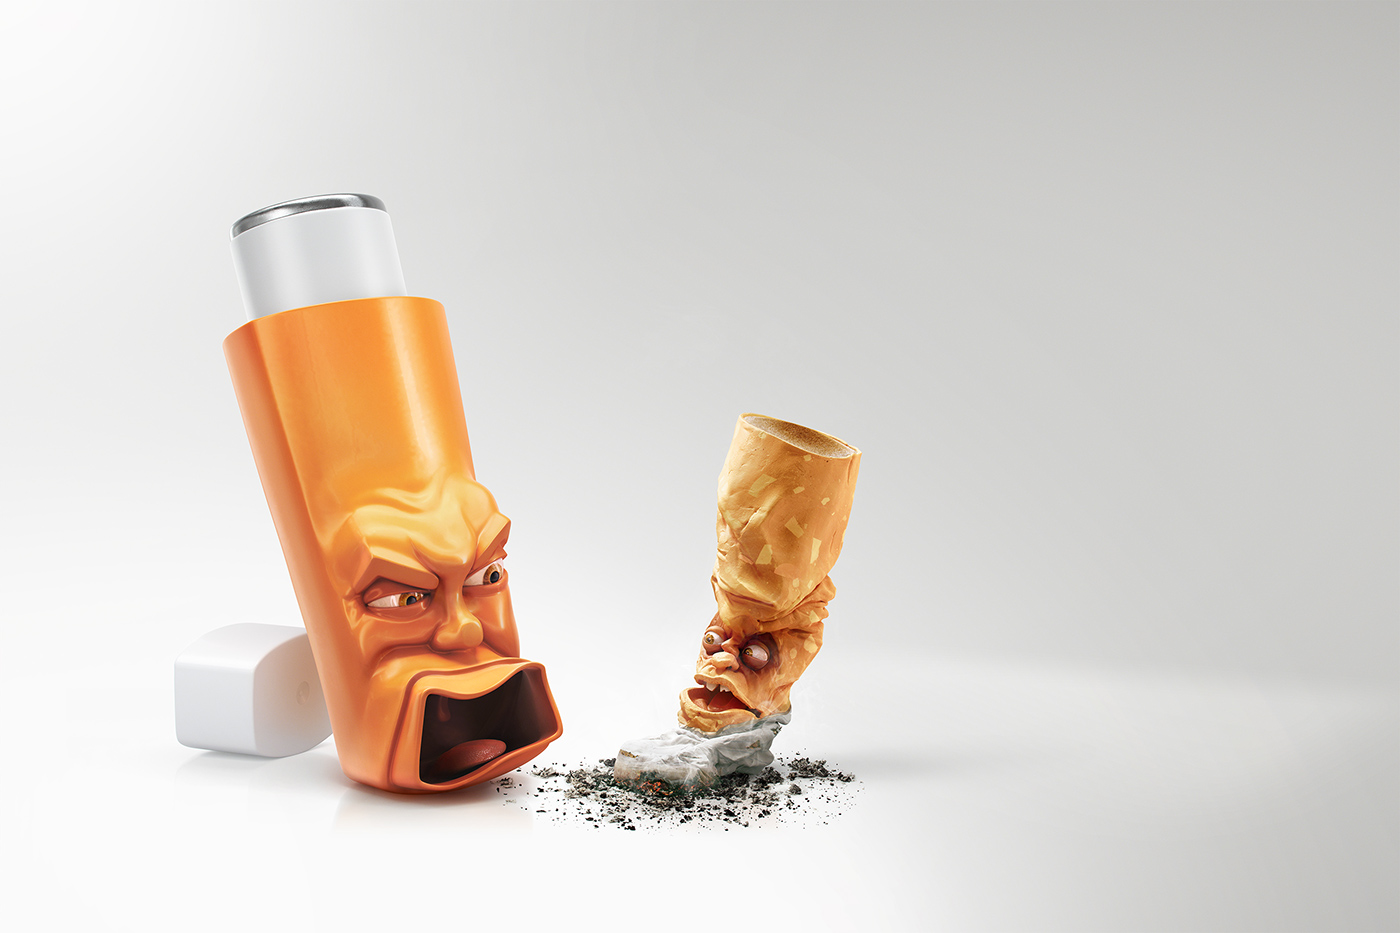 cigarette medicine asthma Pharma Pharmaceutical monsters faces stylised face funny print